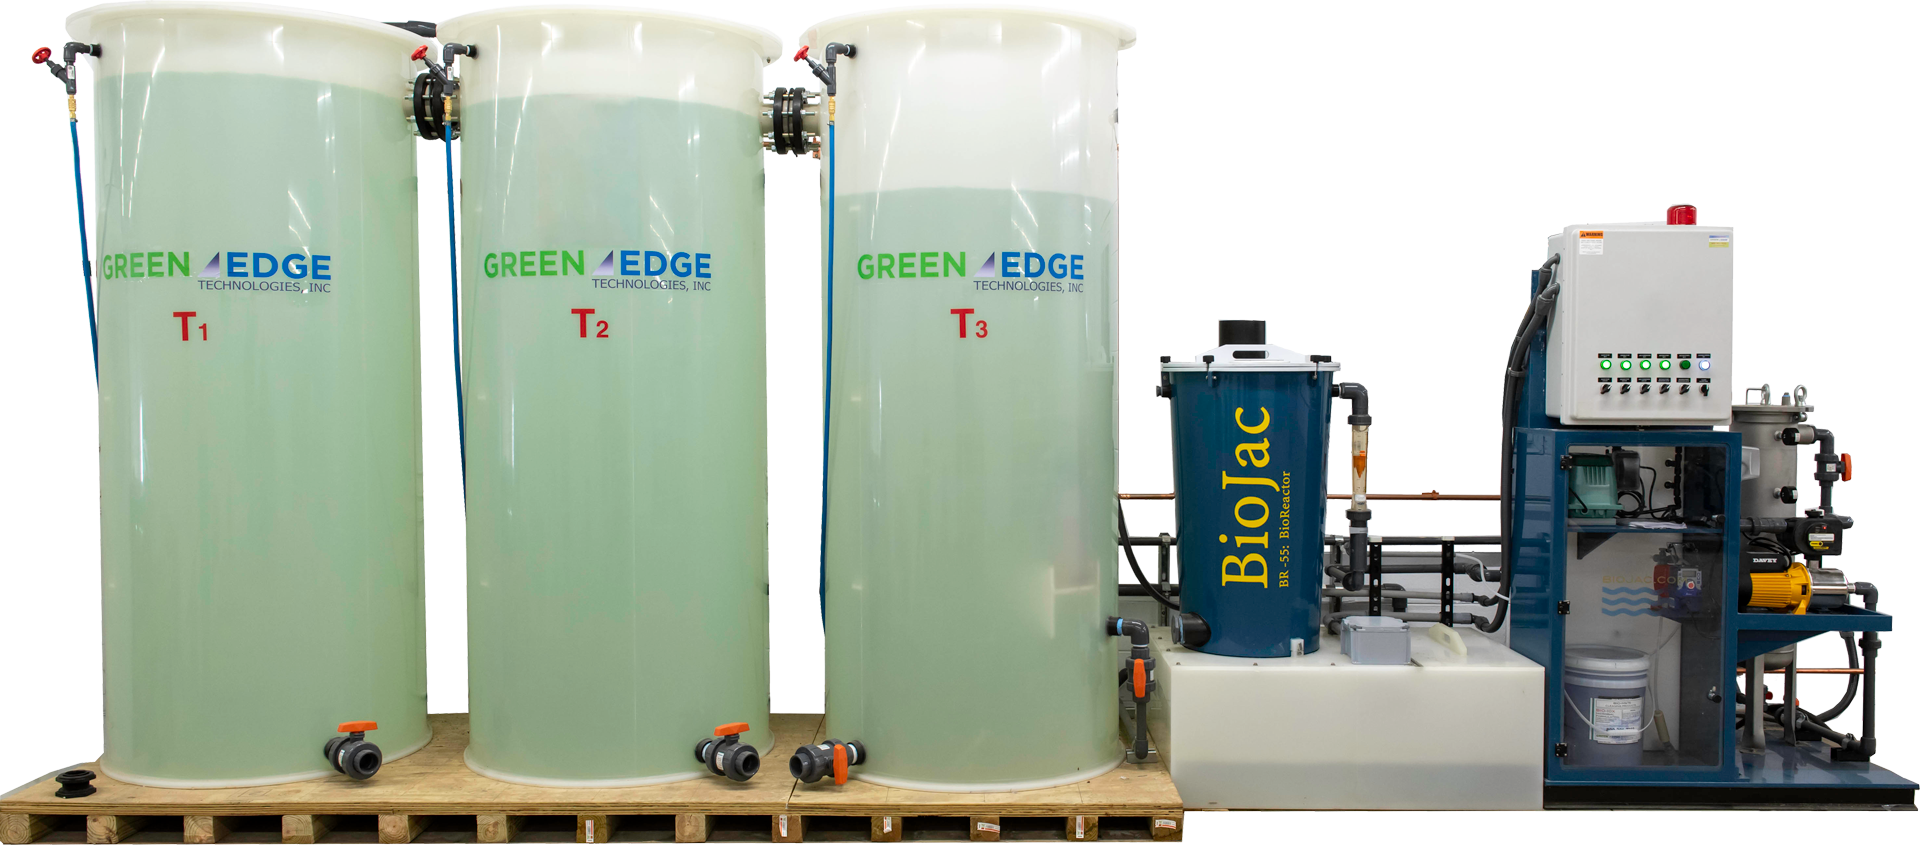 GreenEdge Technologies is a water reclamation company providing water reclaim systems tailored for car washes and wash bays.